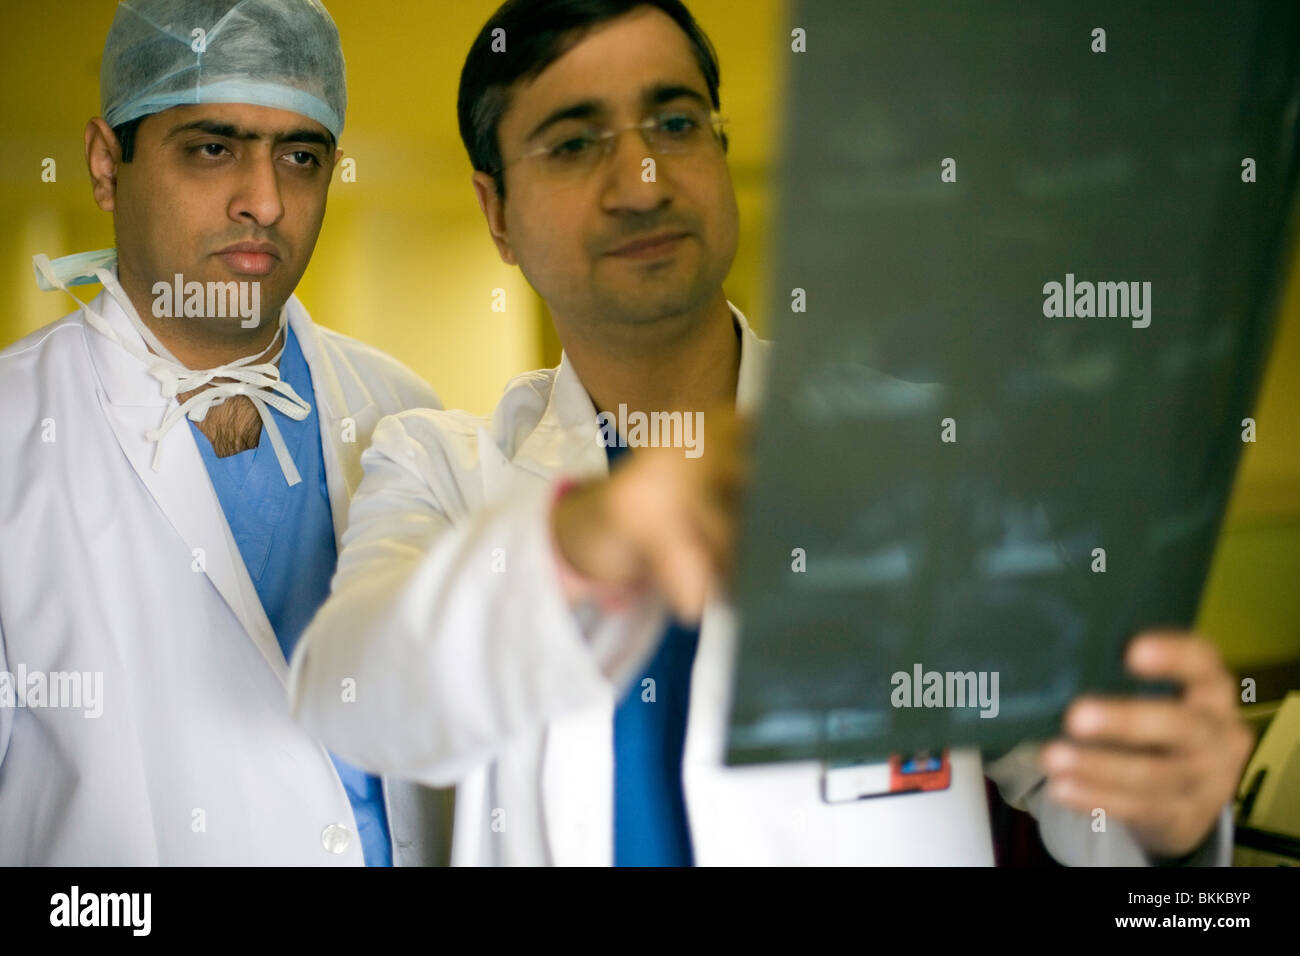 Doctors discuss a patient's x-ray at the Medicity Hospital, Gurgaon, India Stock Photo